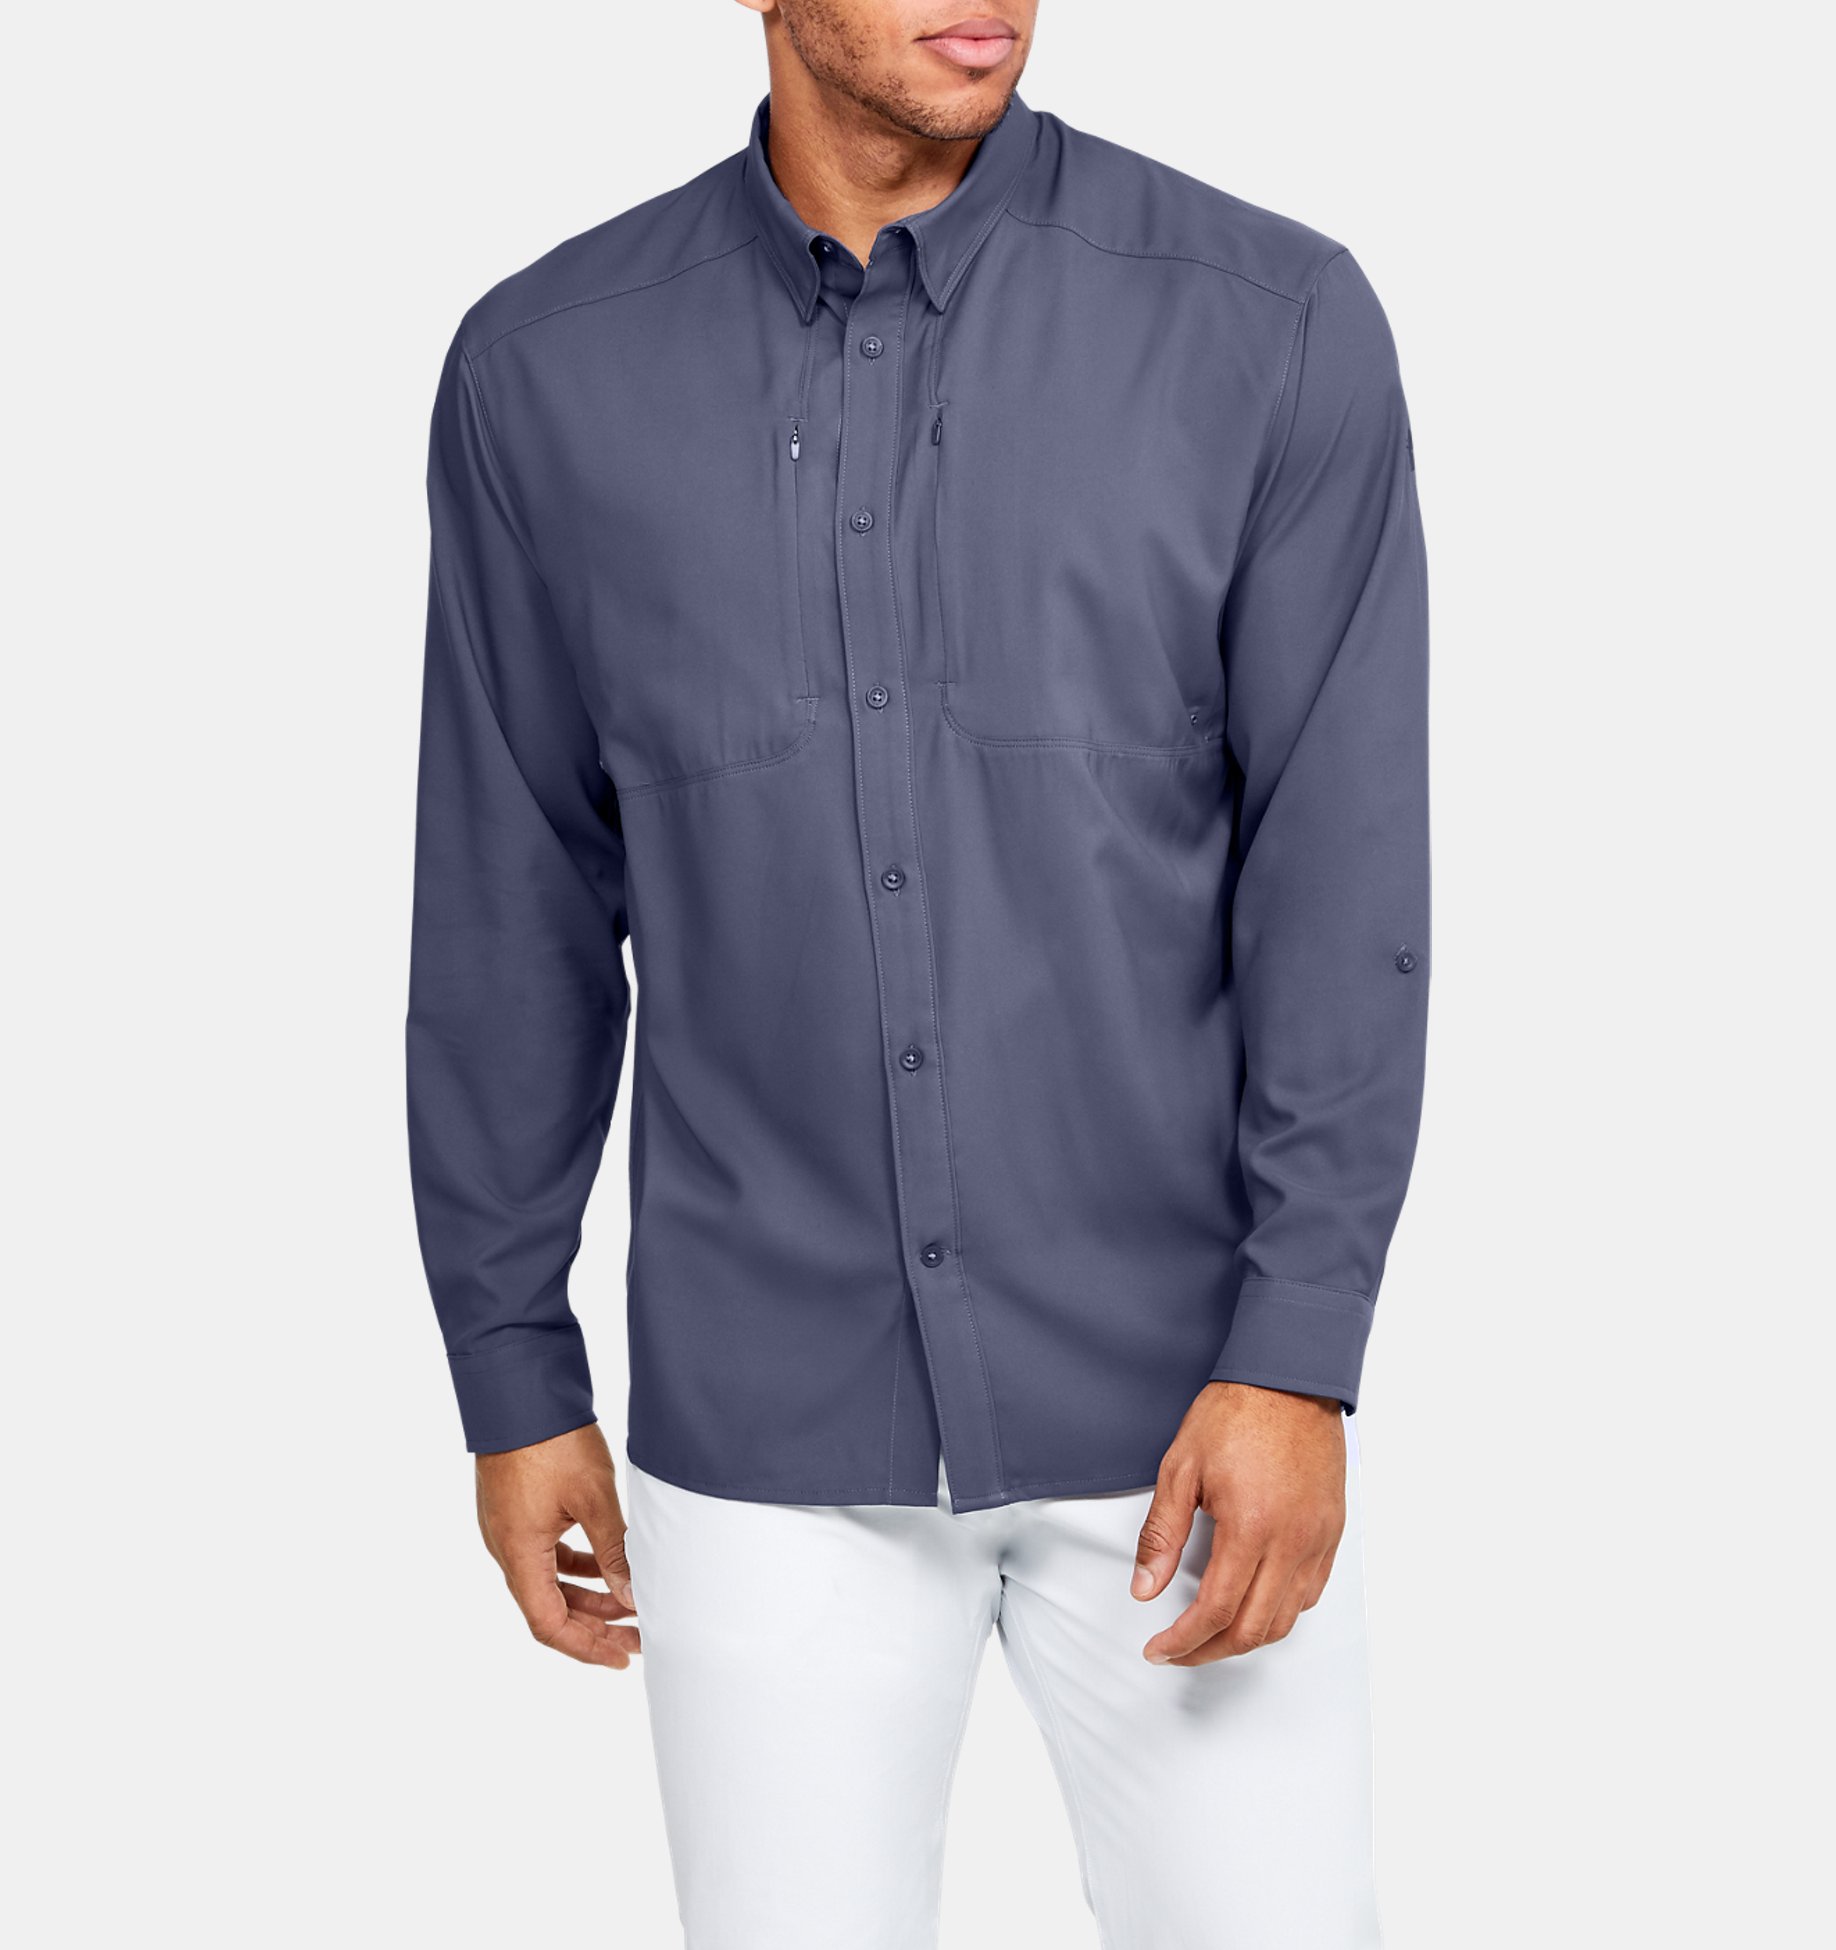 Under Armour Mens Performance Oxford Long Sleeve